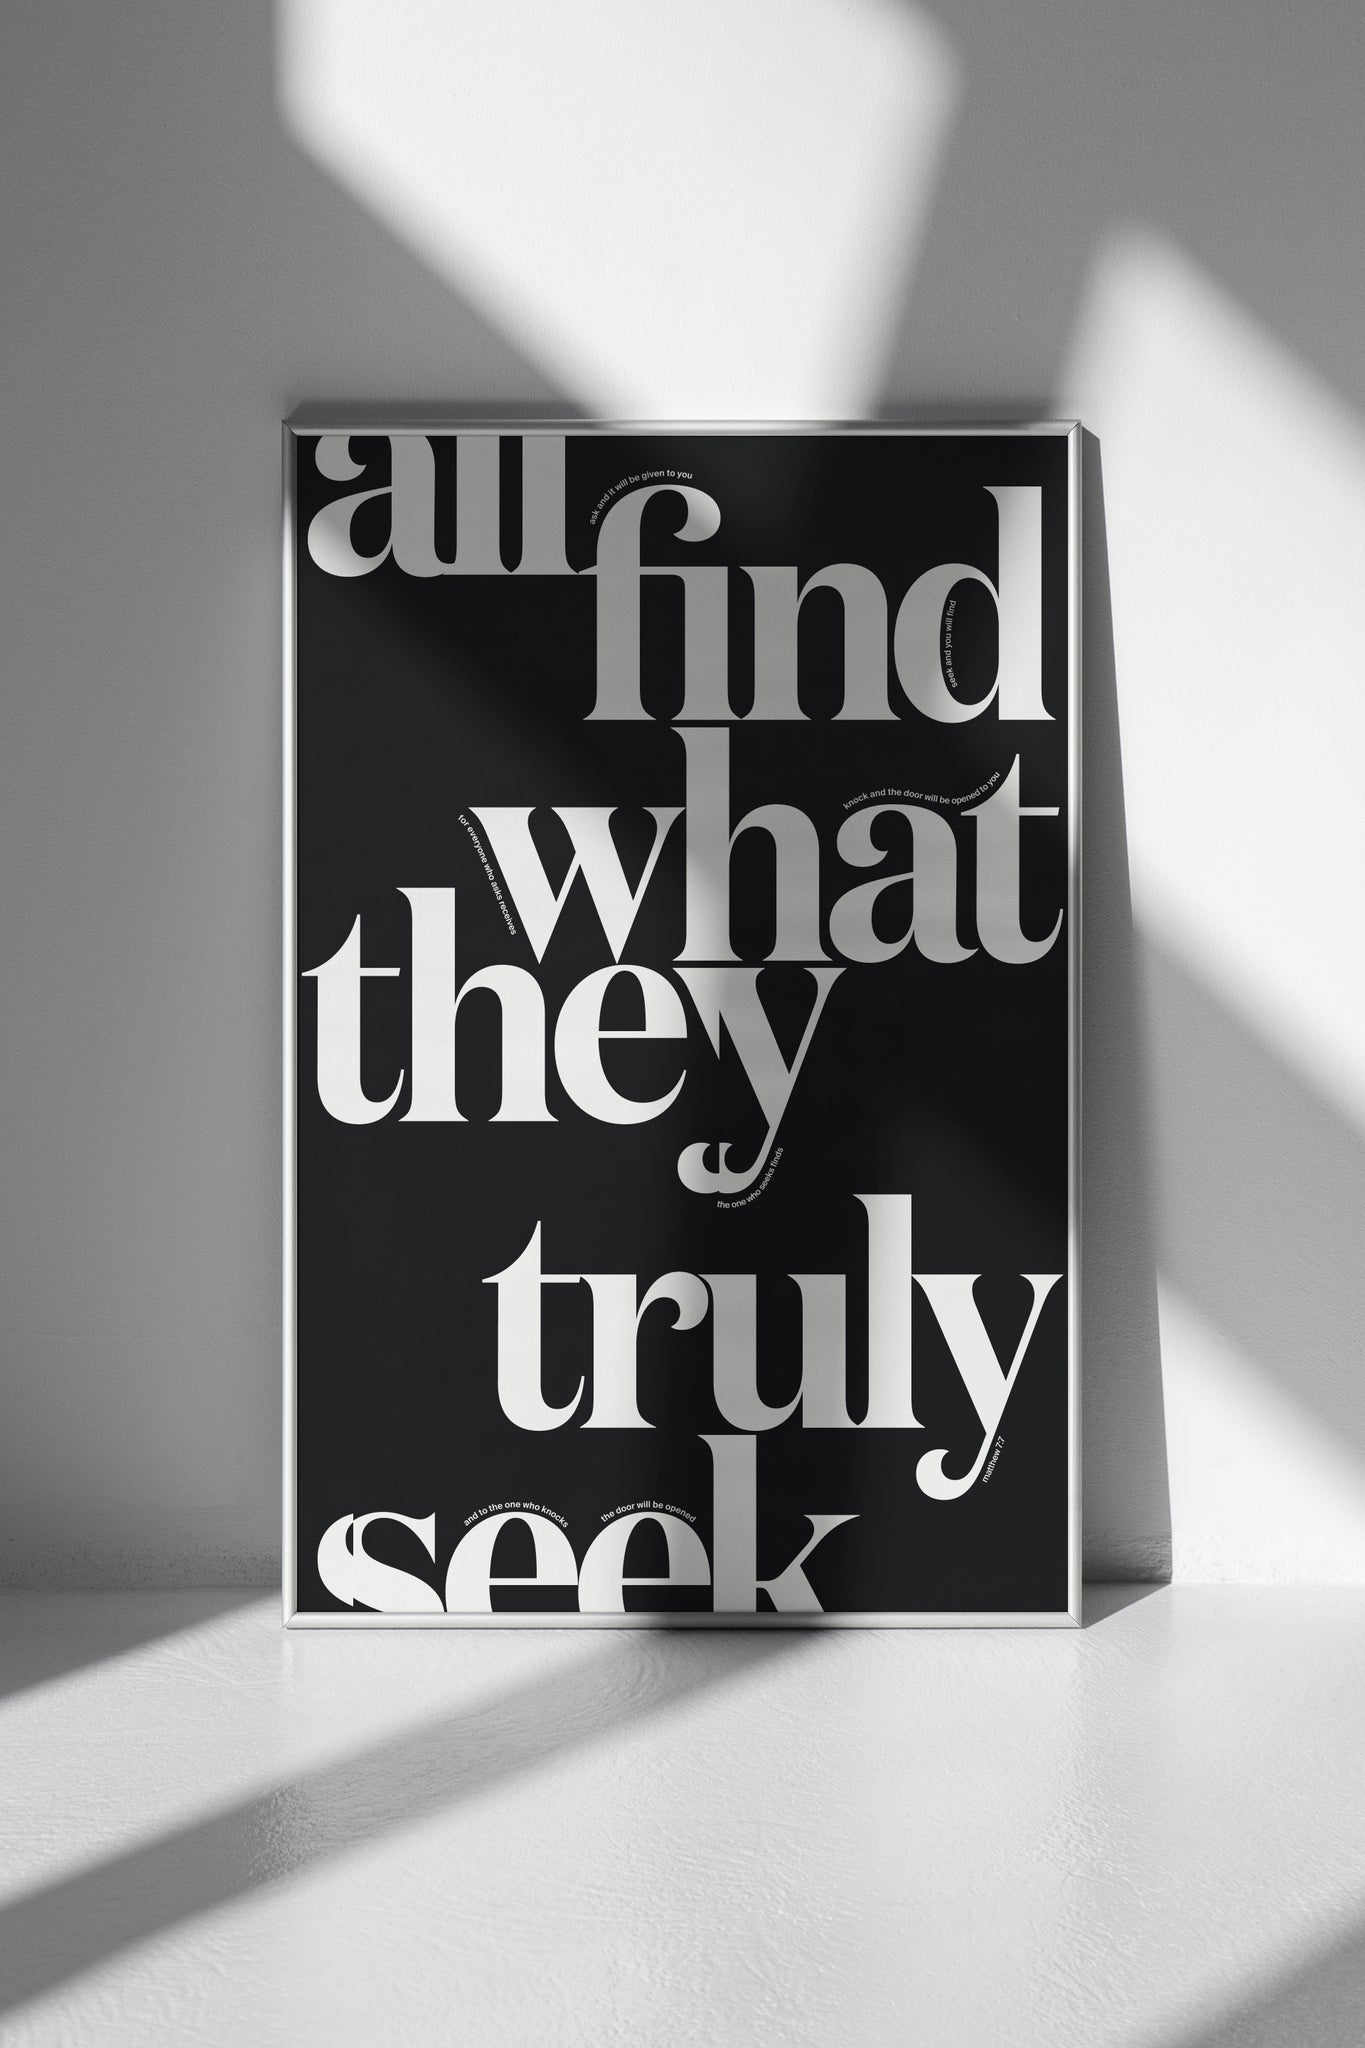 All Find poster by Xtian Miller via SIGNAL A